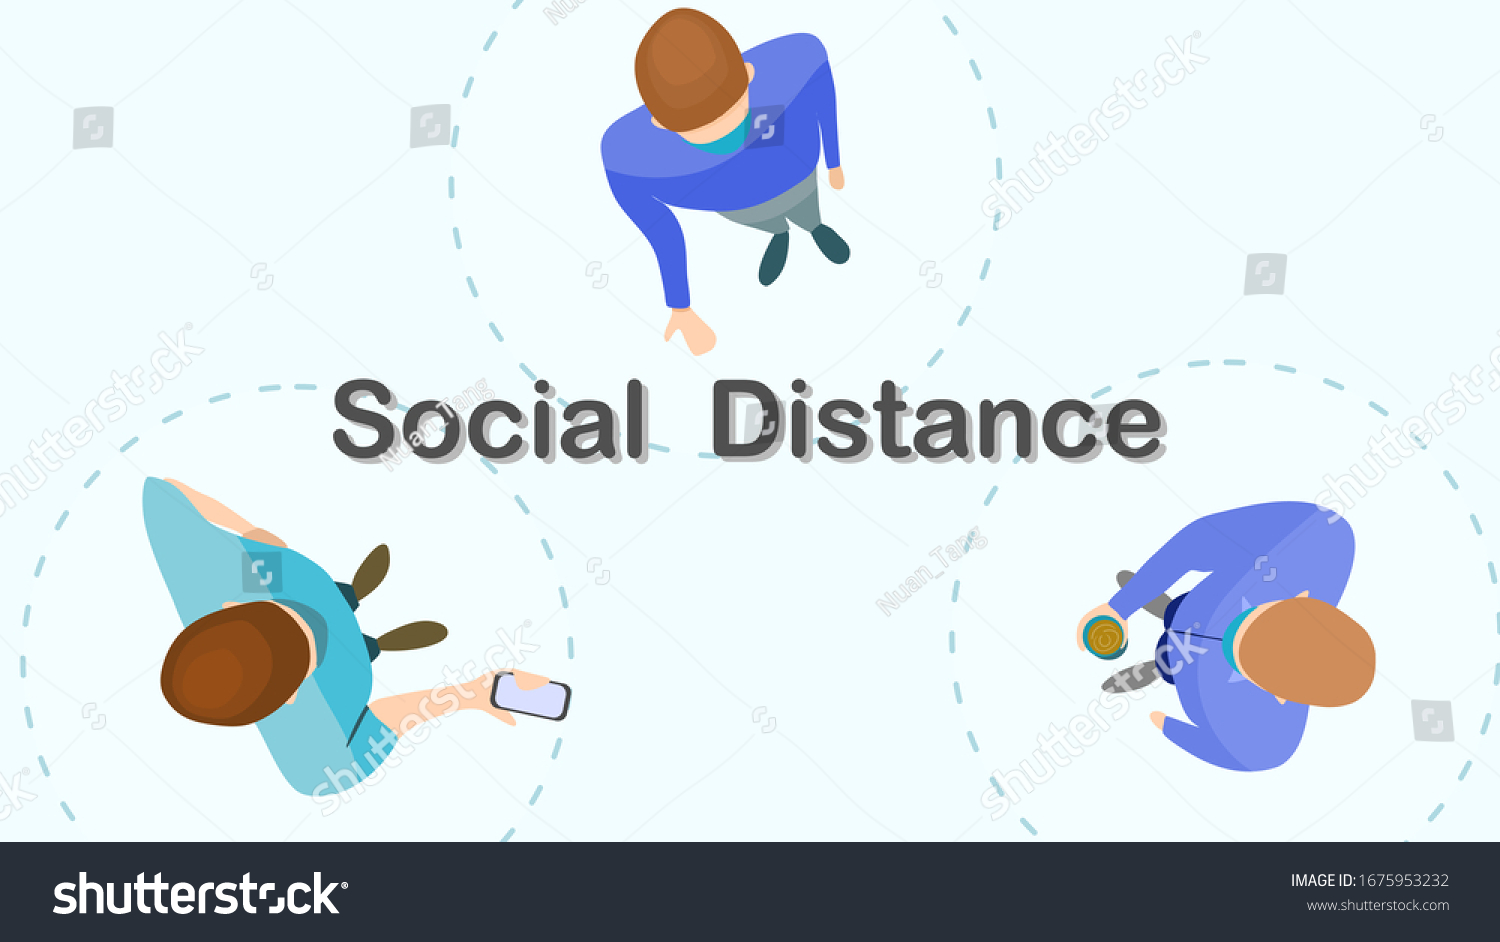 Social distance preventing infection concept : Top view of 1 meter isolation between person to stop spreading of respiratory virus. vector illustration, flat design #1675953232